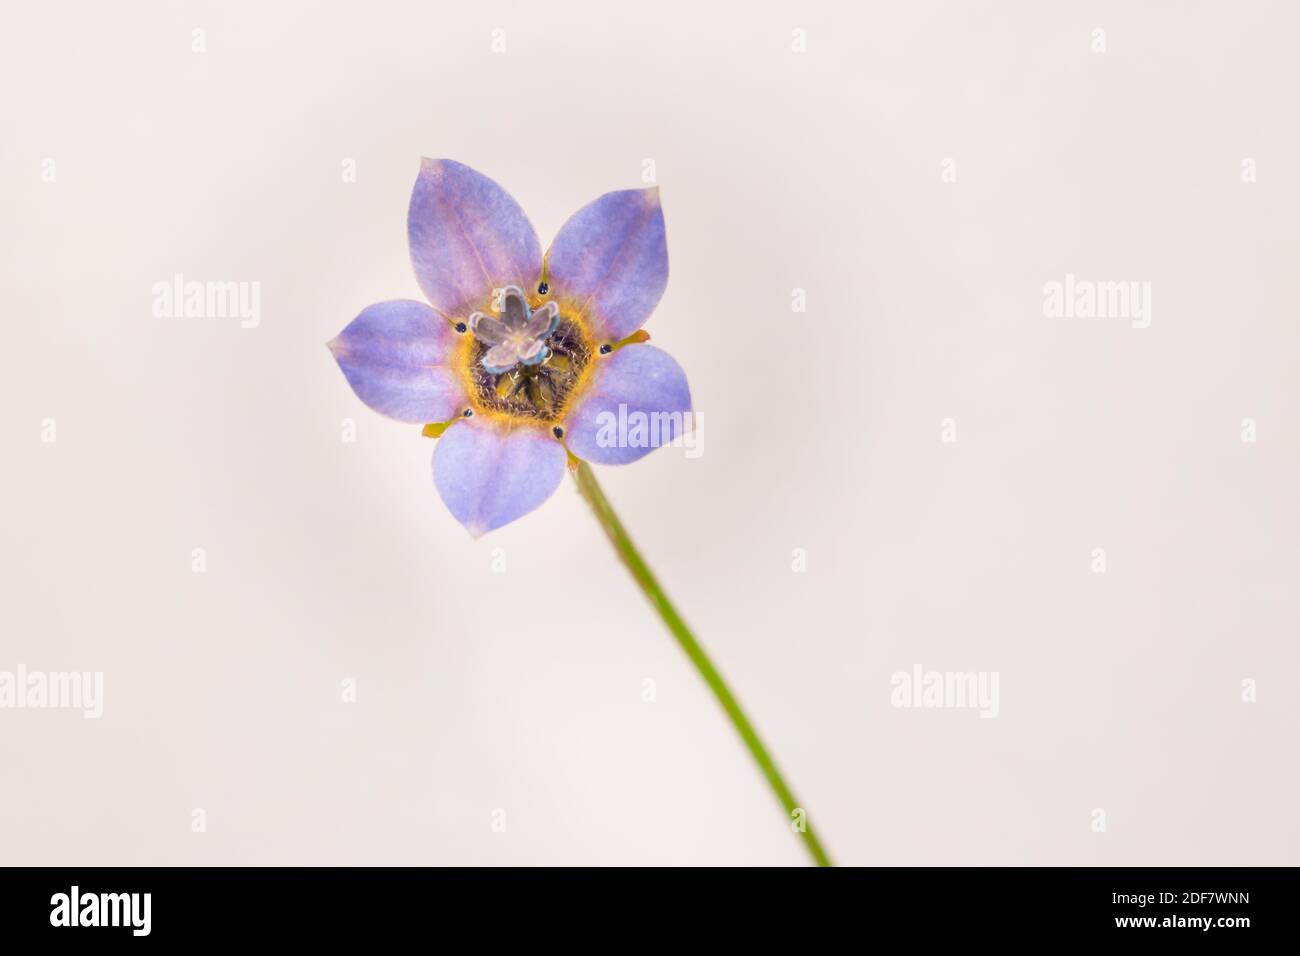 Blue and white Wild flower growing during spring, Cape Town, South Africa Stock Photo